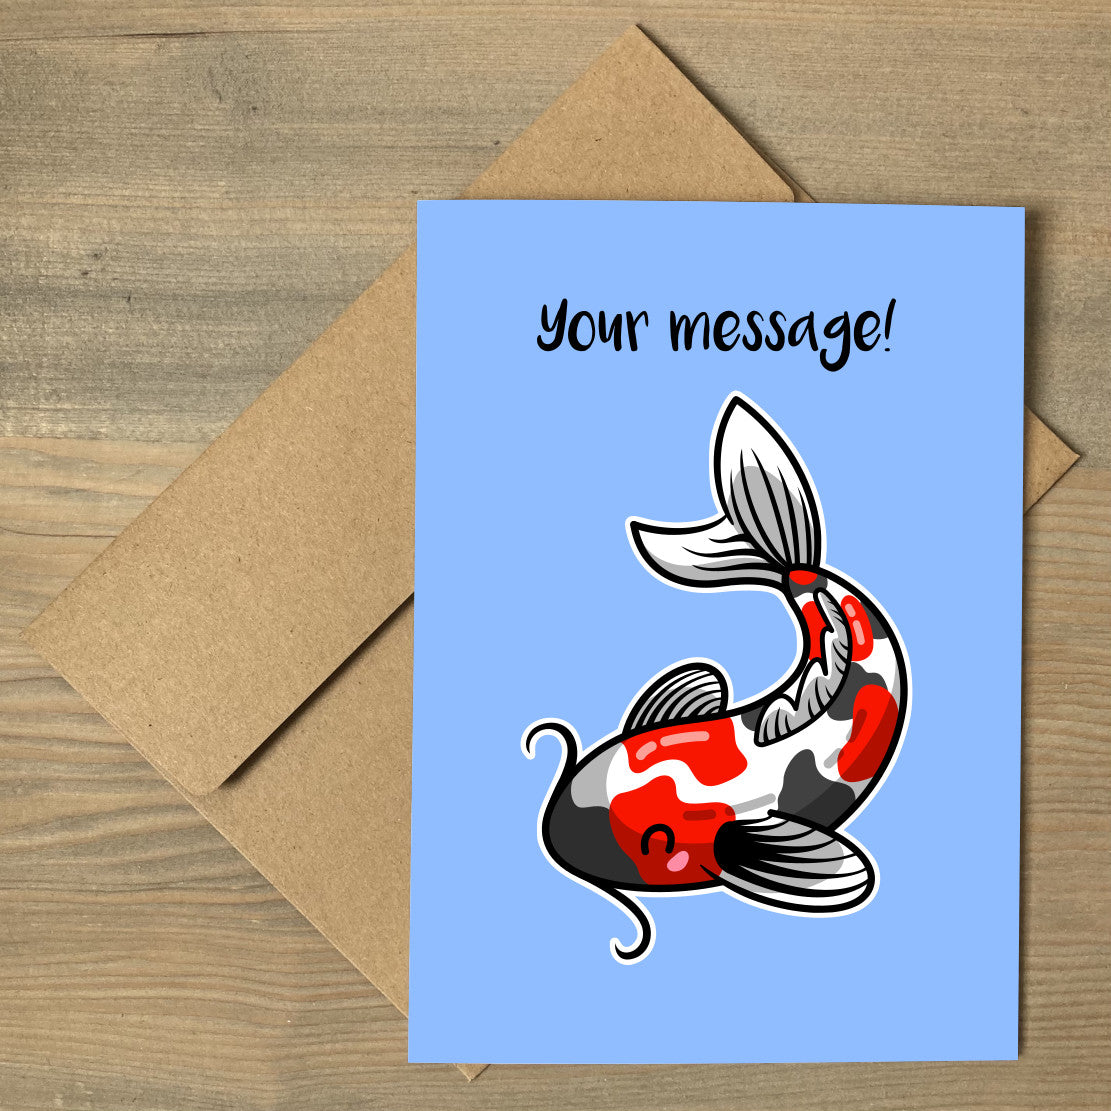 A blue greeting card lying flat on a brown envelope with a design of a red white and grey koi carp fish facing to the left and the words your message written above